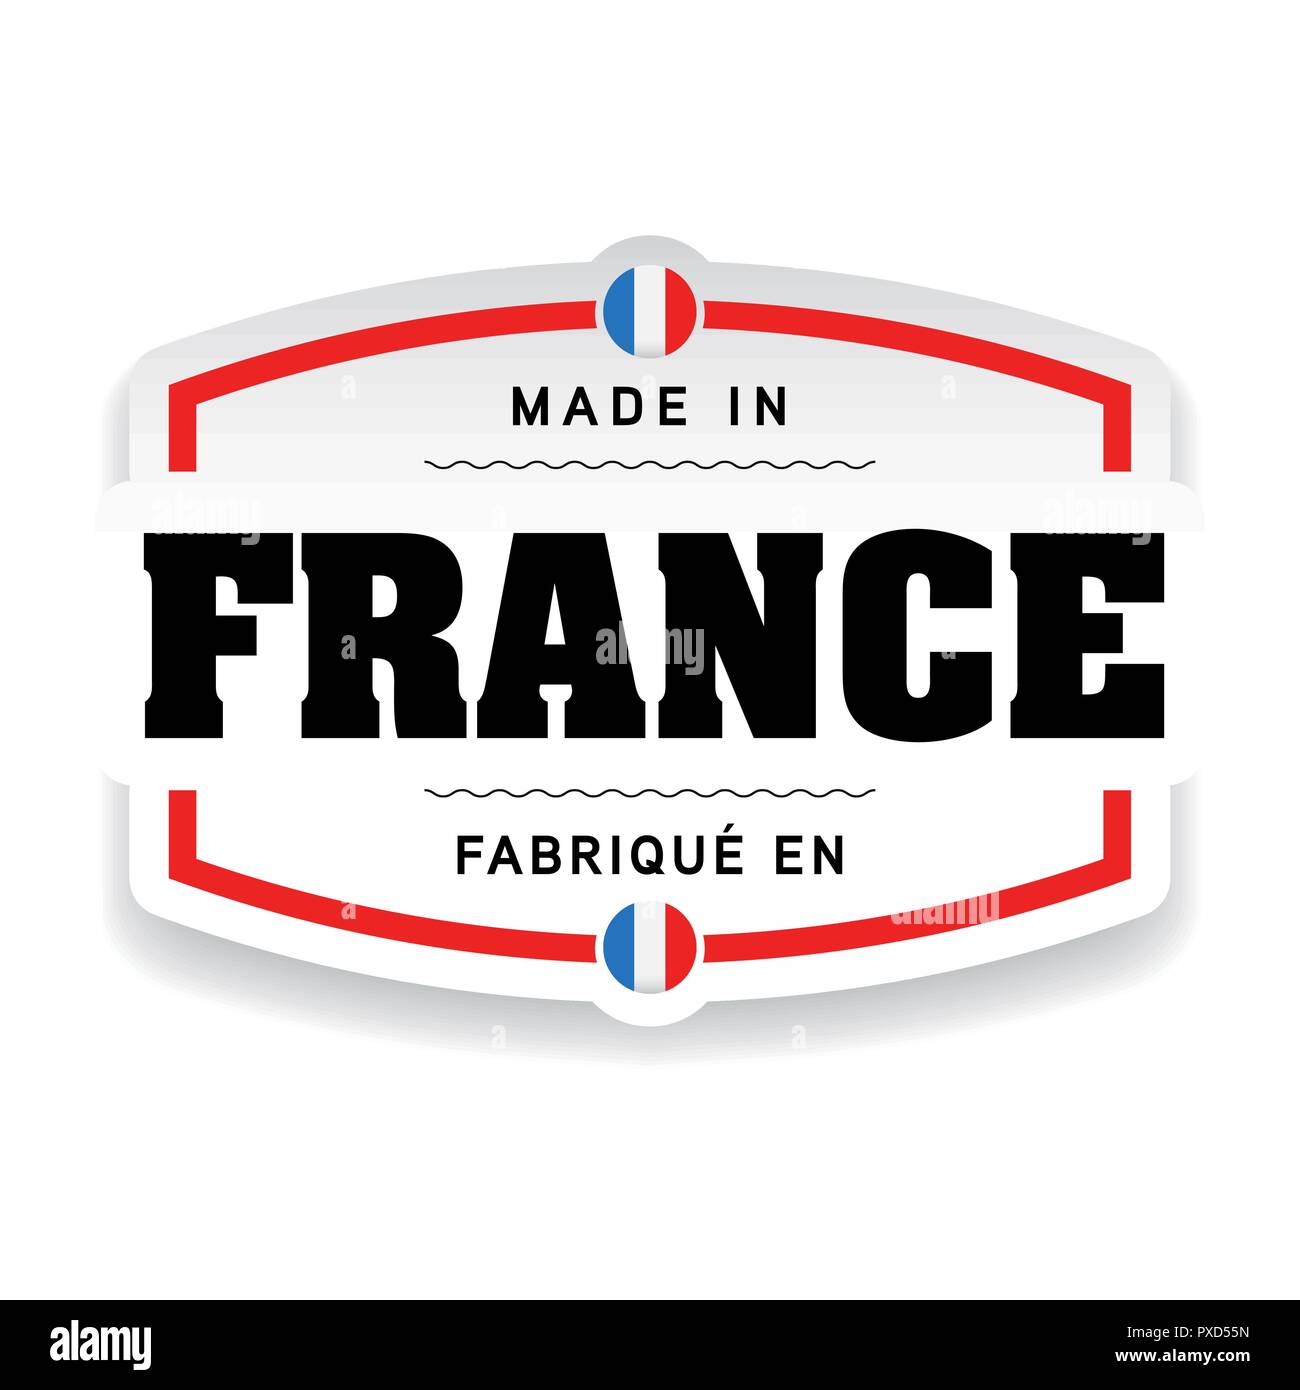 Made in France label Stock Vector